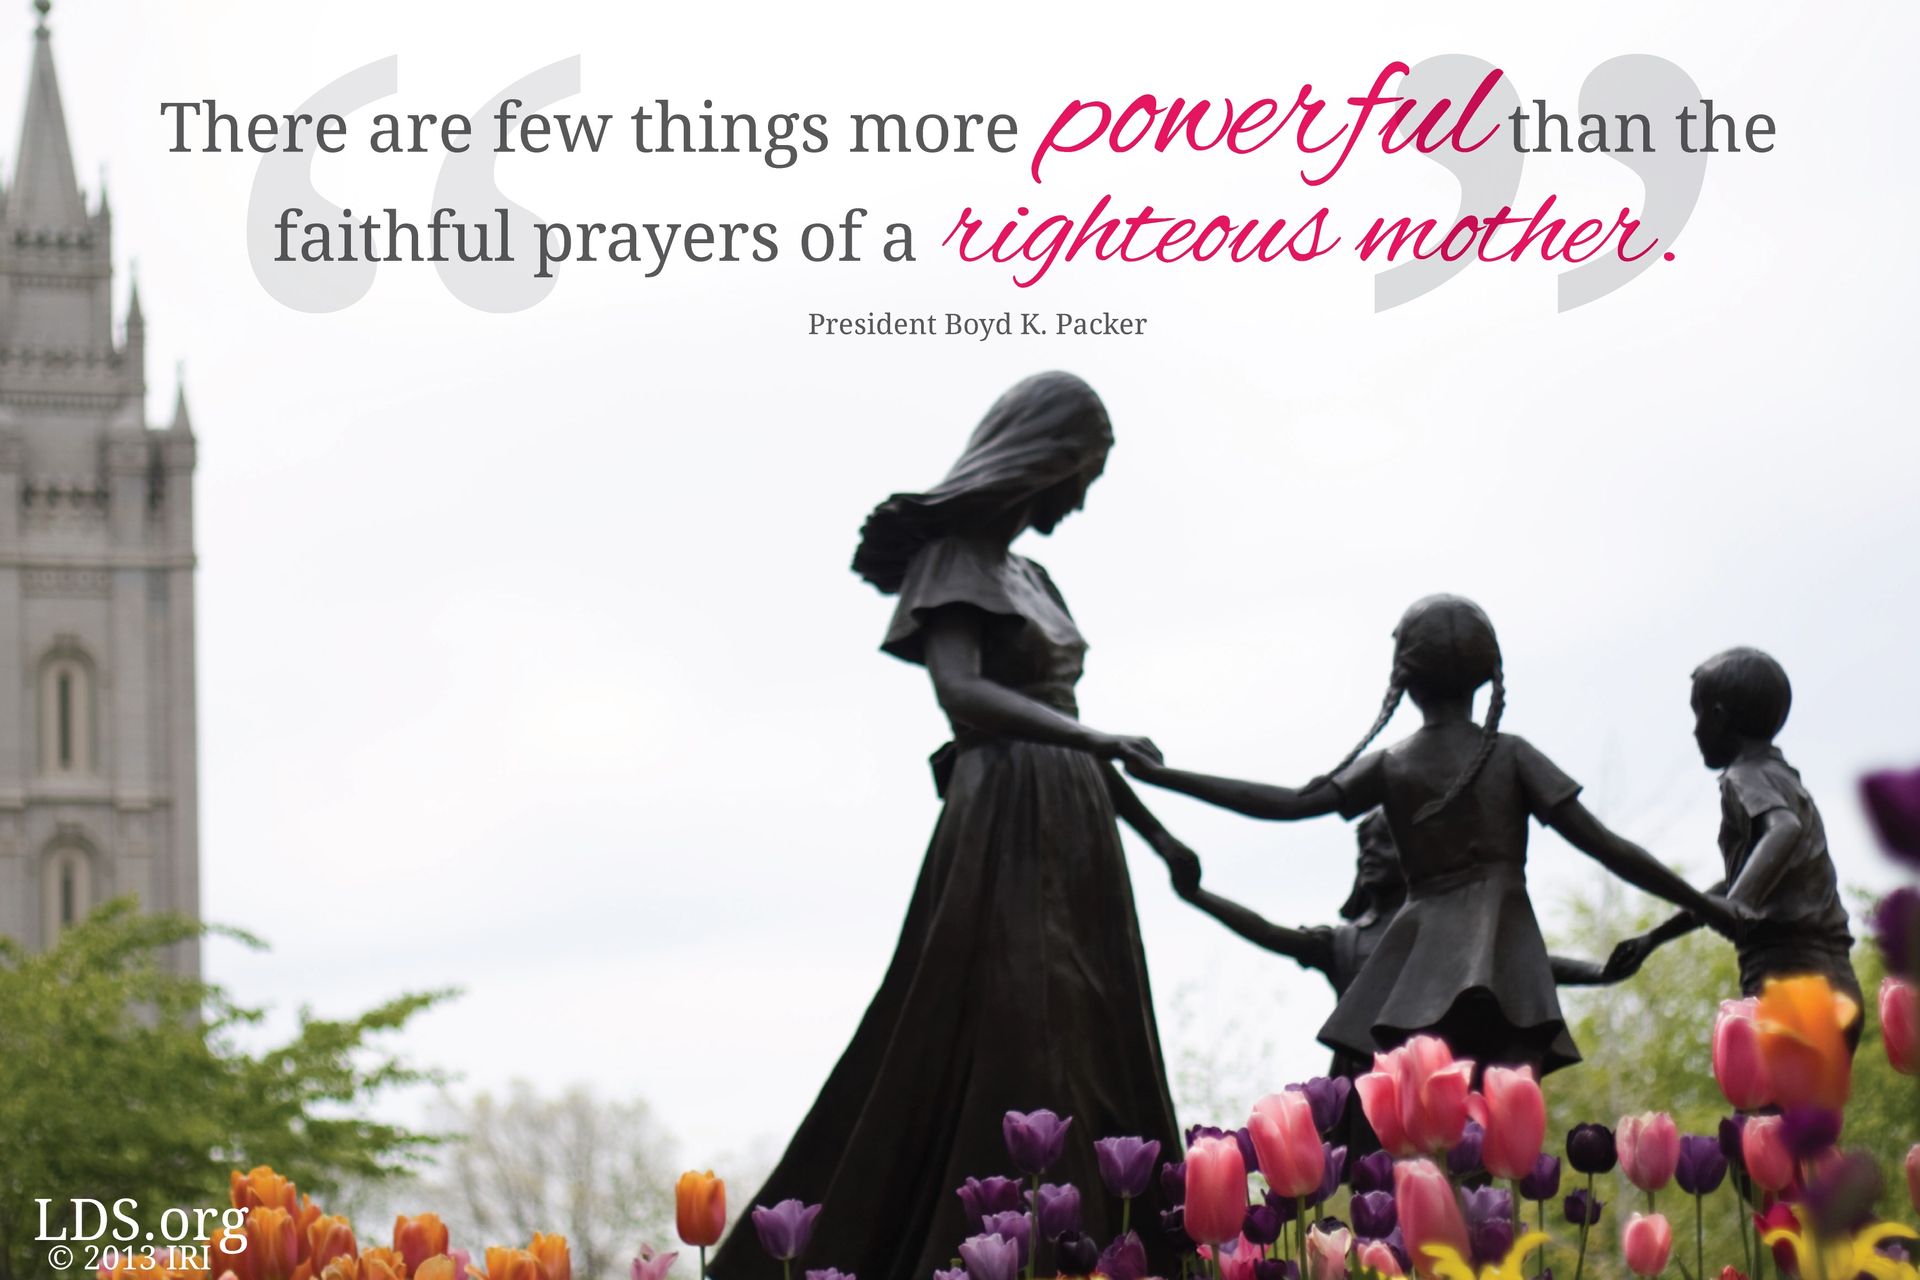 “There are few things more powerful than the faithful prayers of a righteous mother.”—President Boyd K. Packer, “These Things I Know” © undefined ipCode 1.